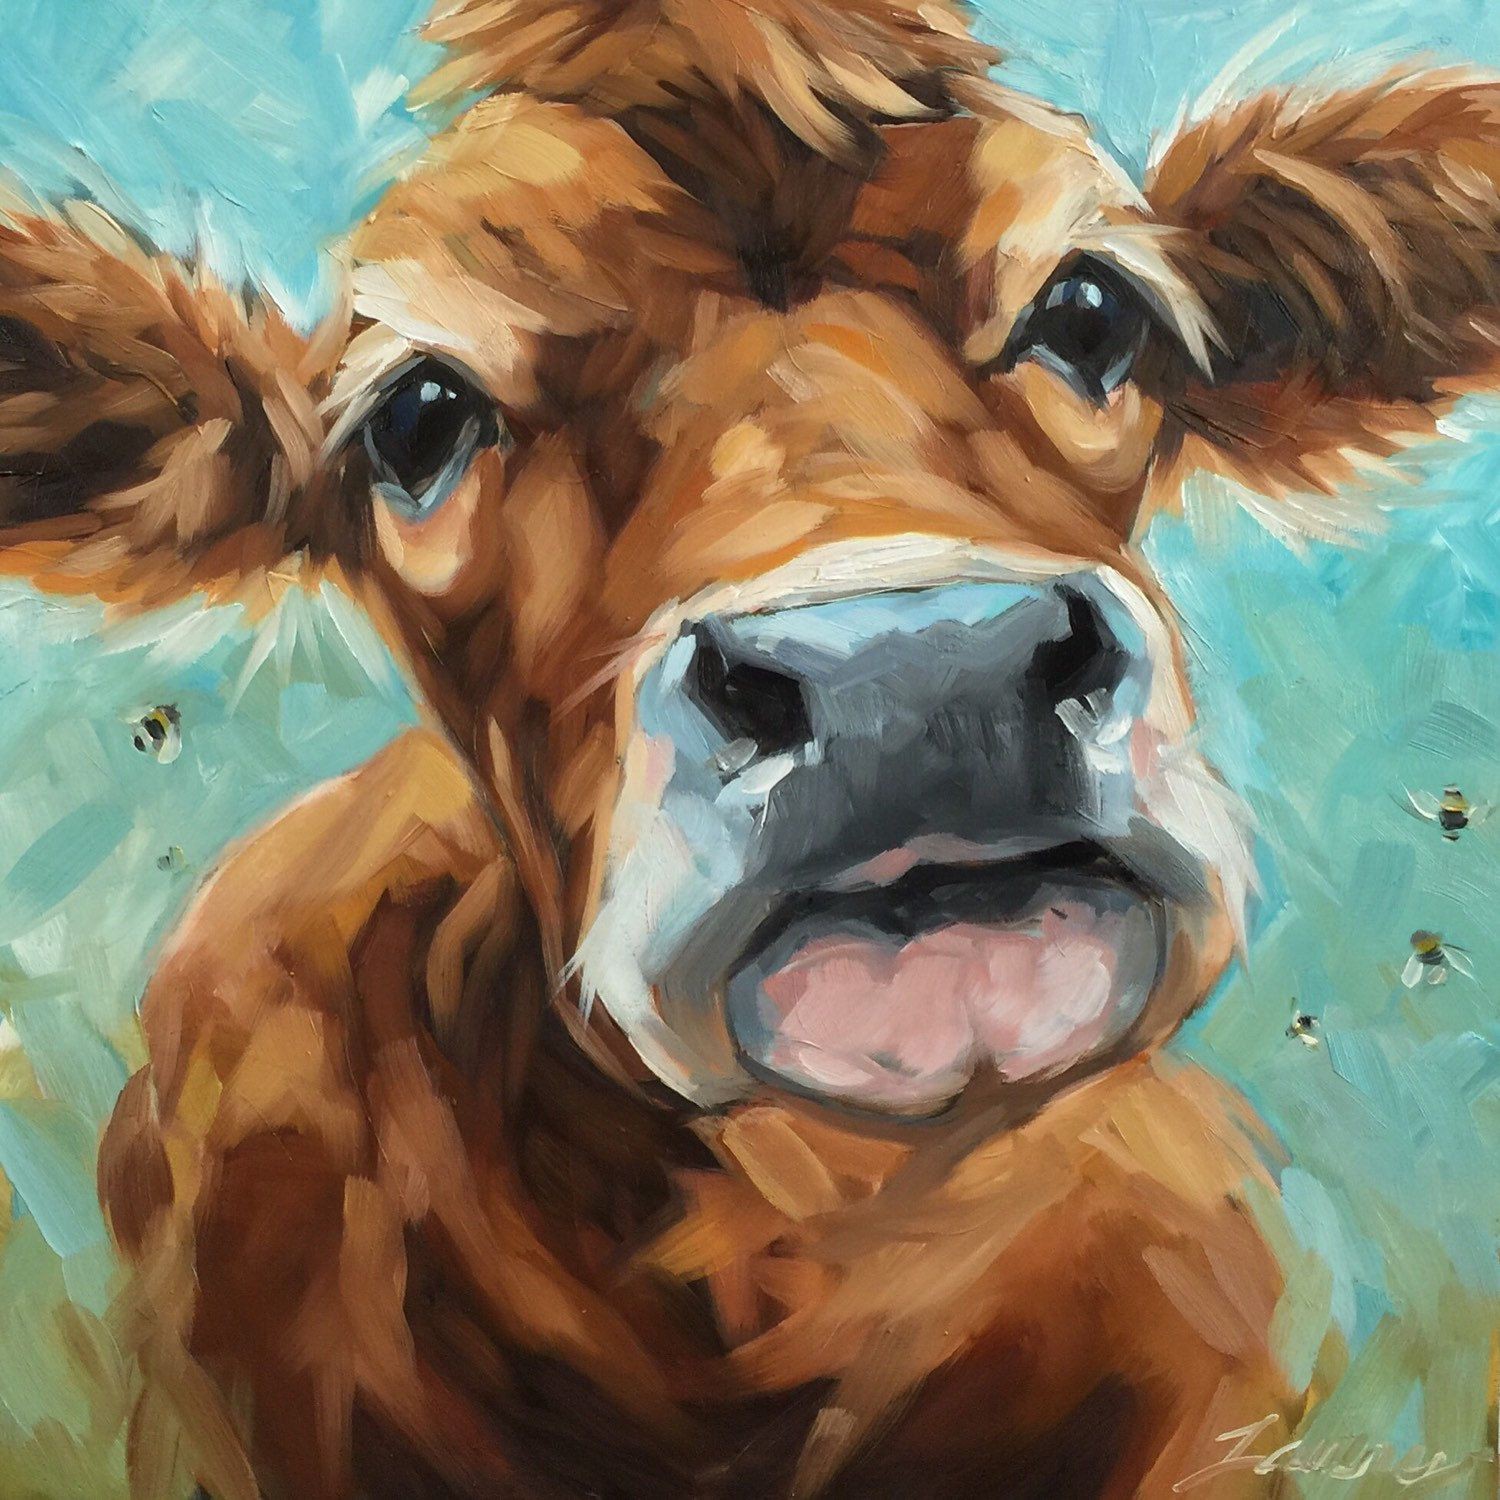 Cow painting Original impressionistic oil painting of a cow and bees by Andrea Lavery 12x12" on panel paintings of cows and farm animals by LaveryART on